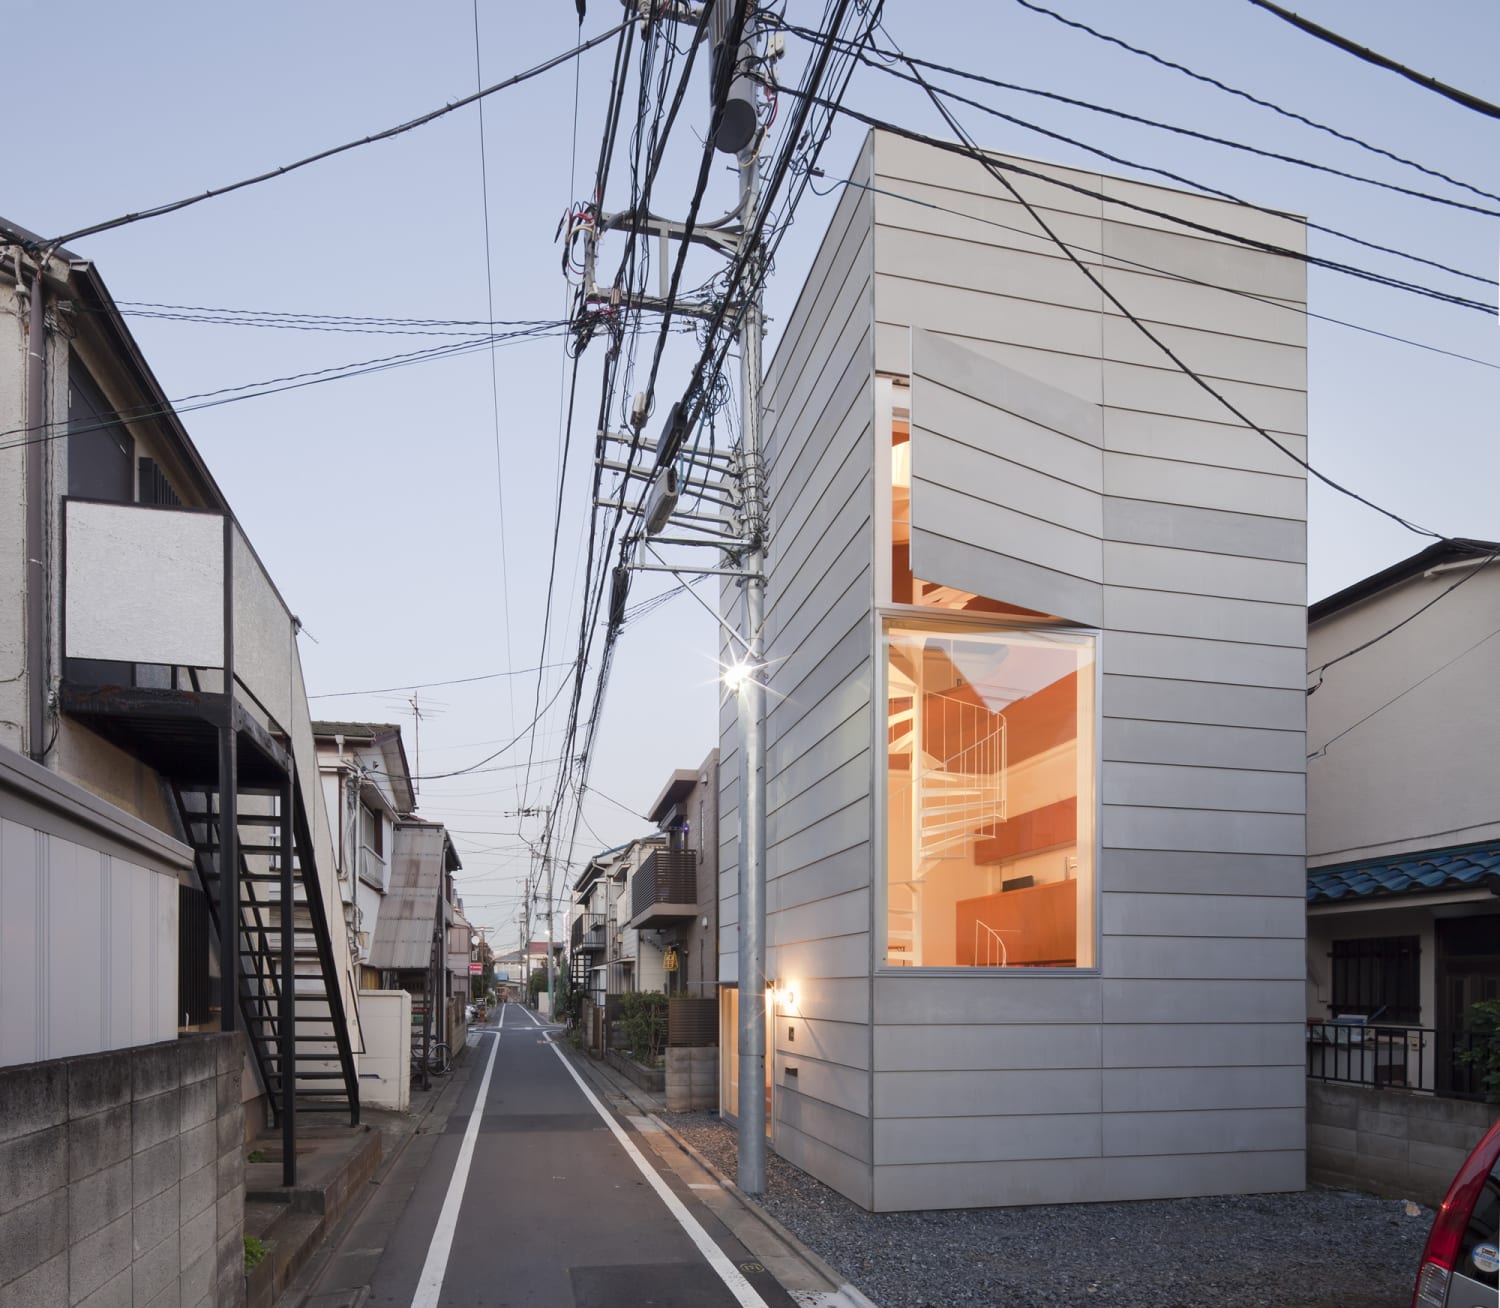 Small house in Tokyo, Japan - Unemori Architects